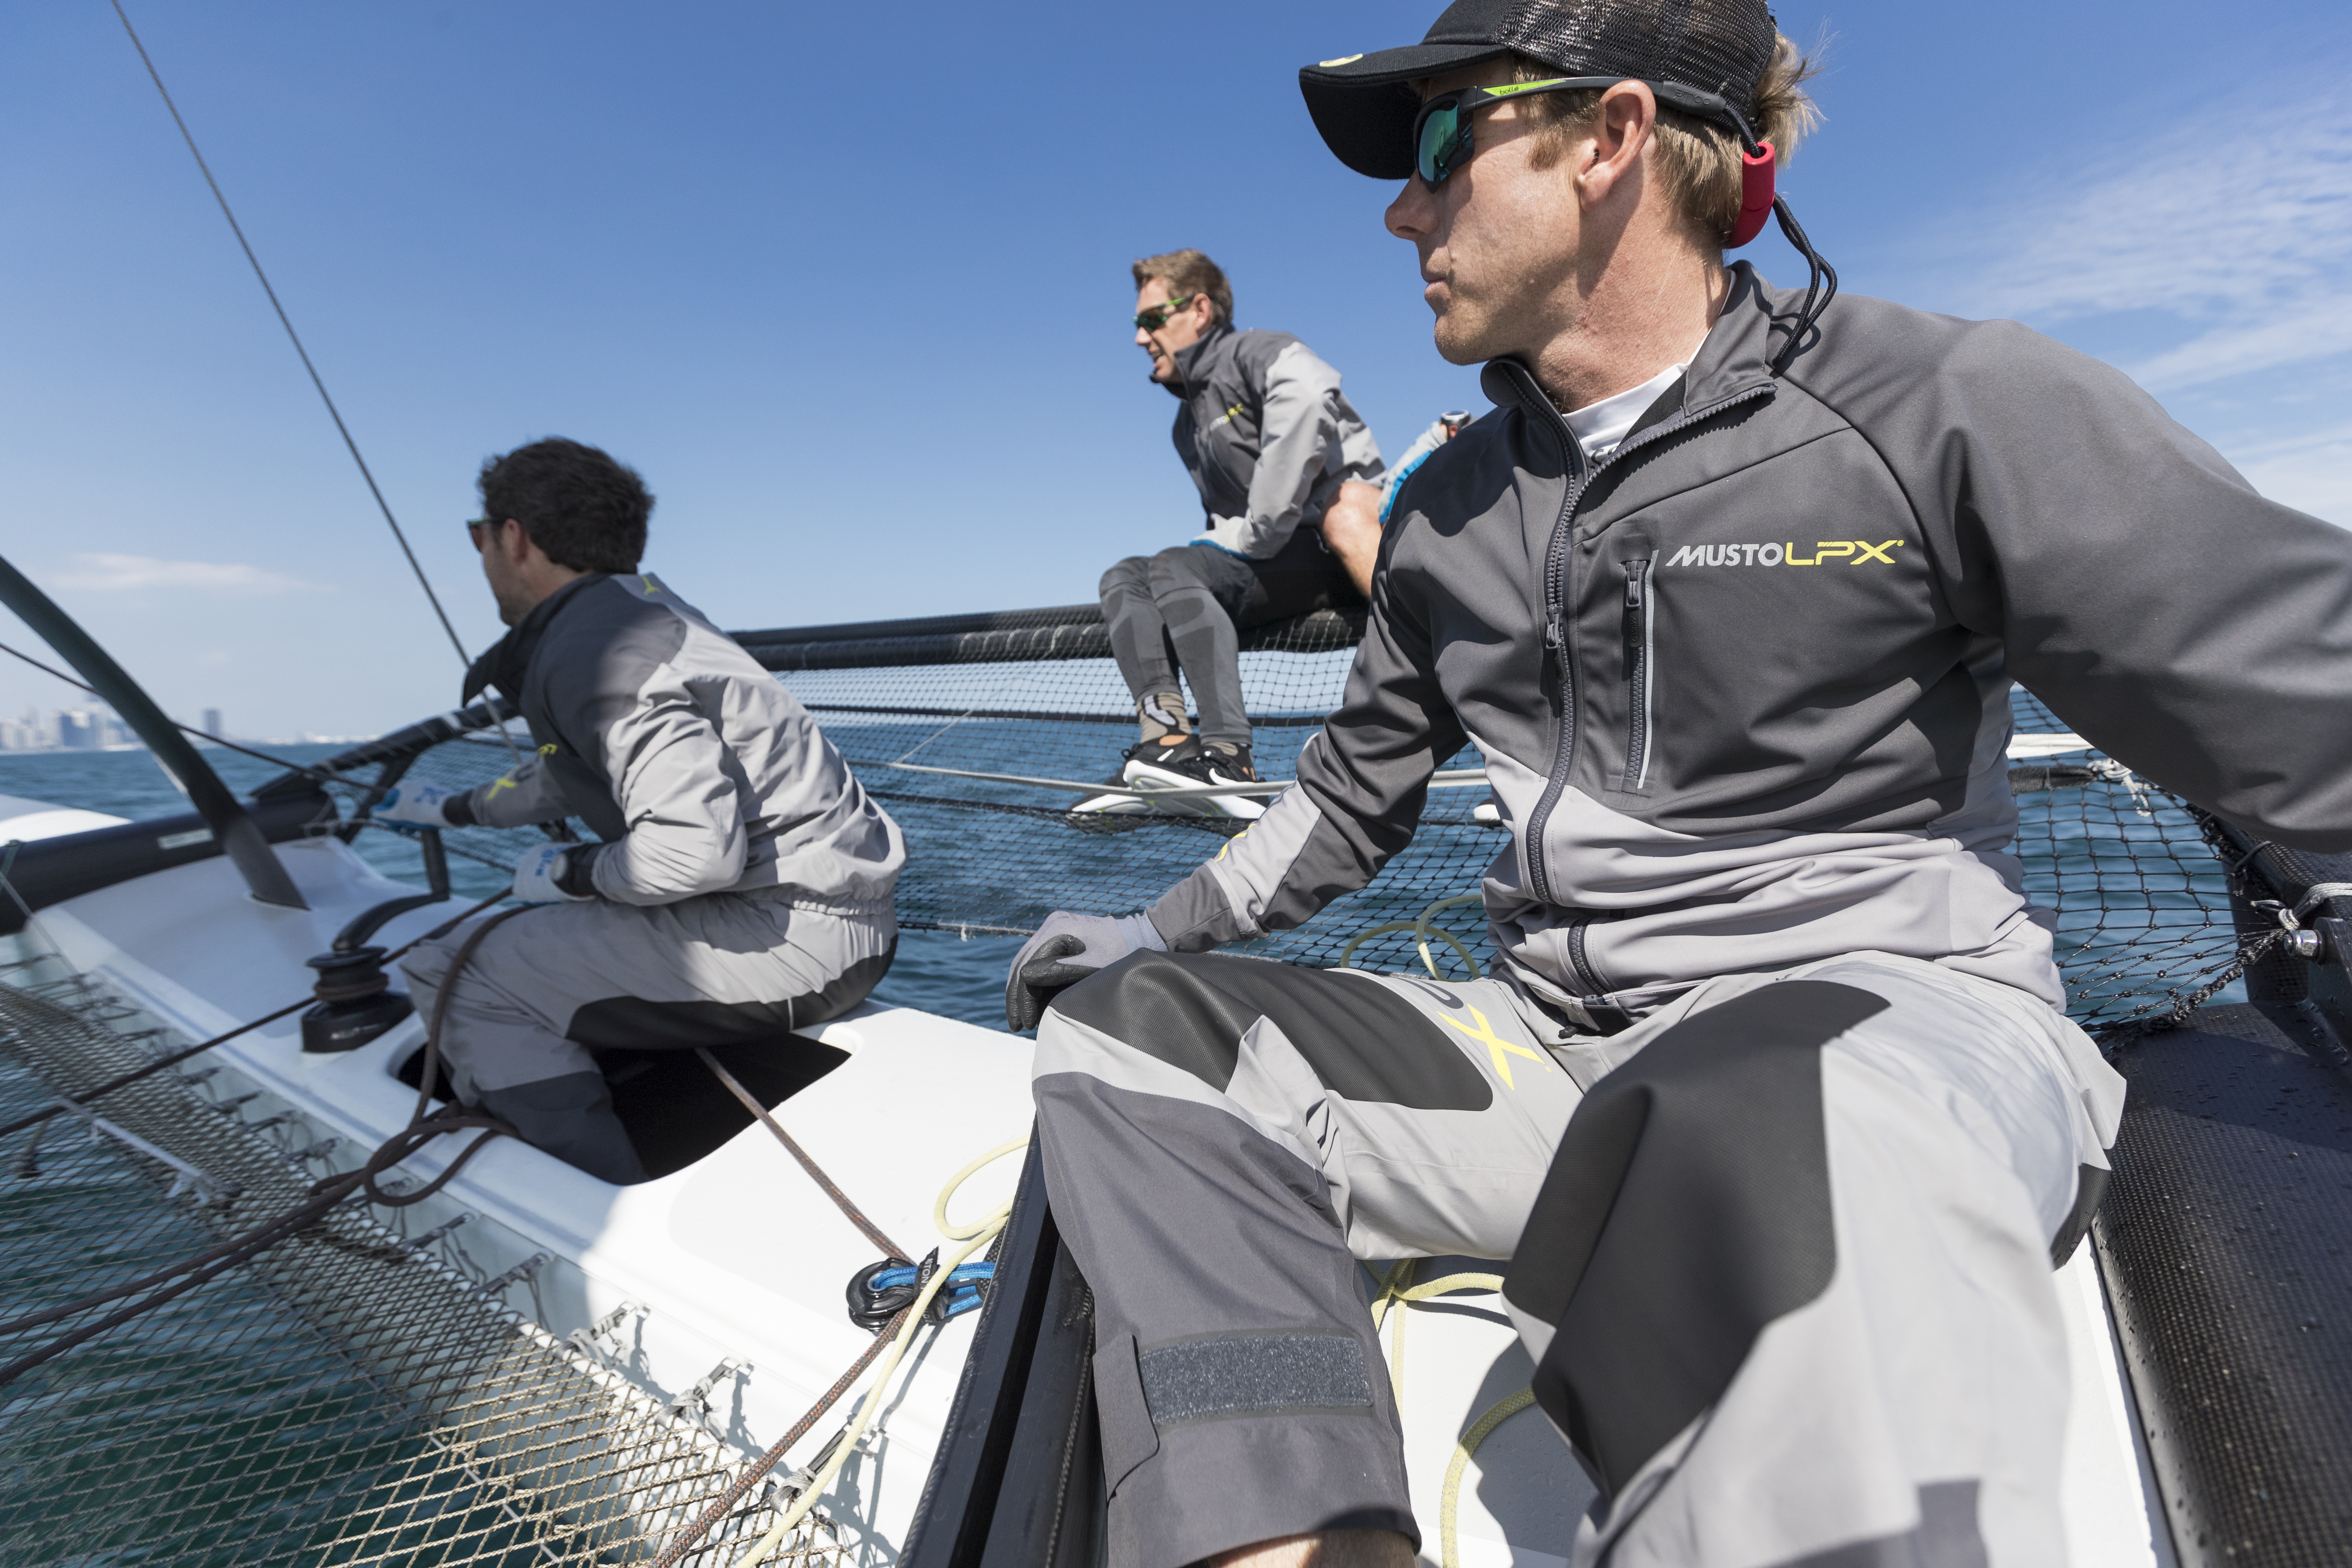 Musto’s LPX Collection